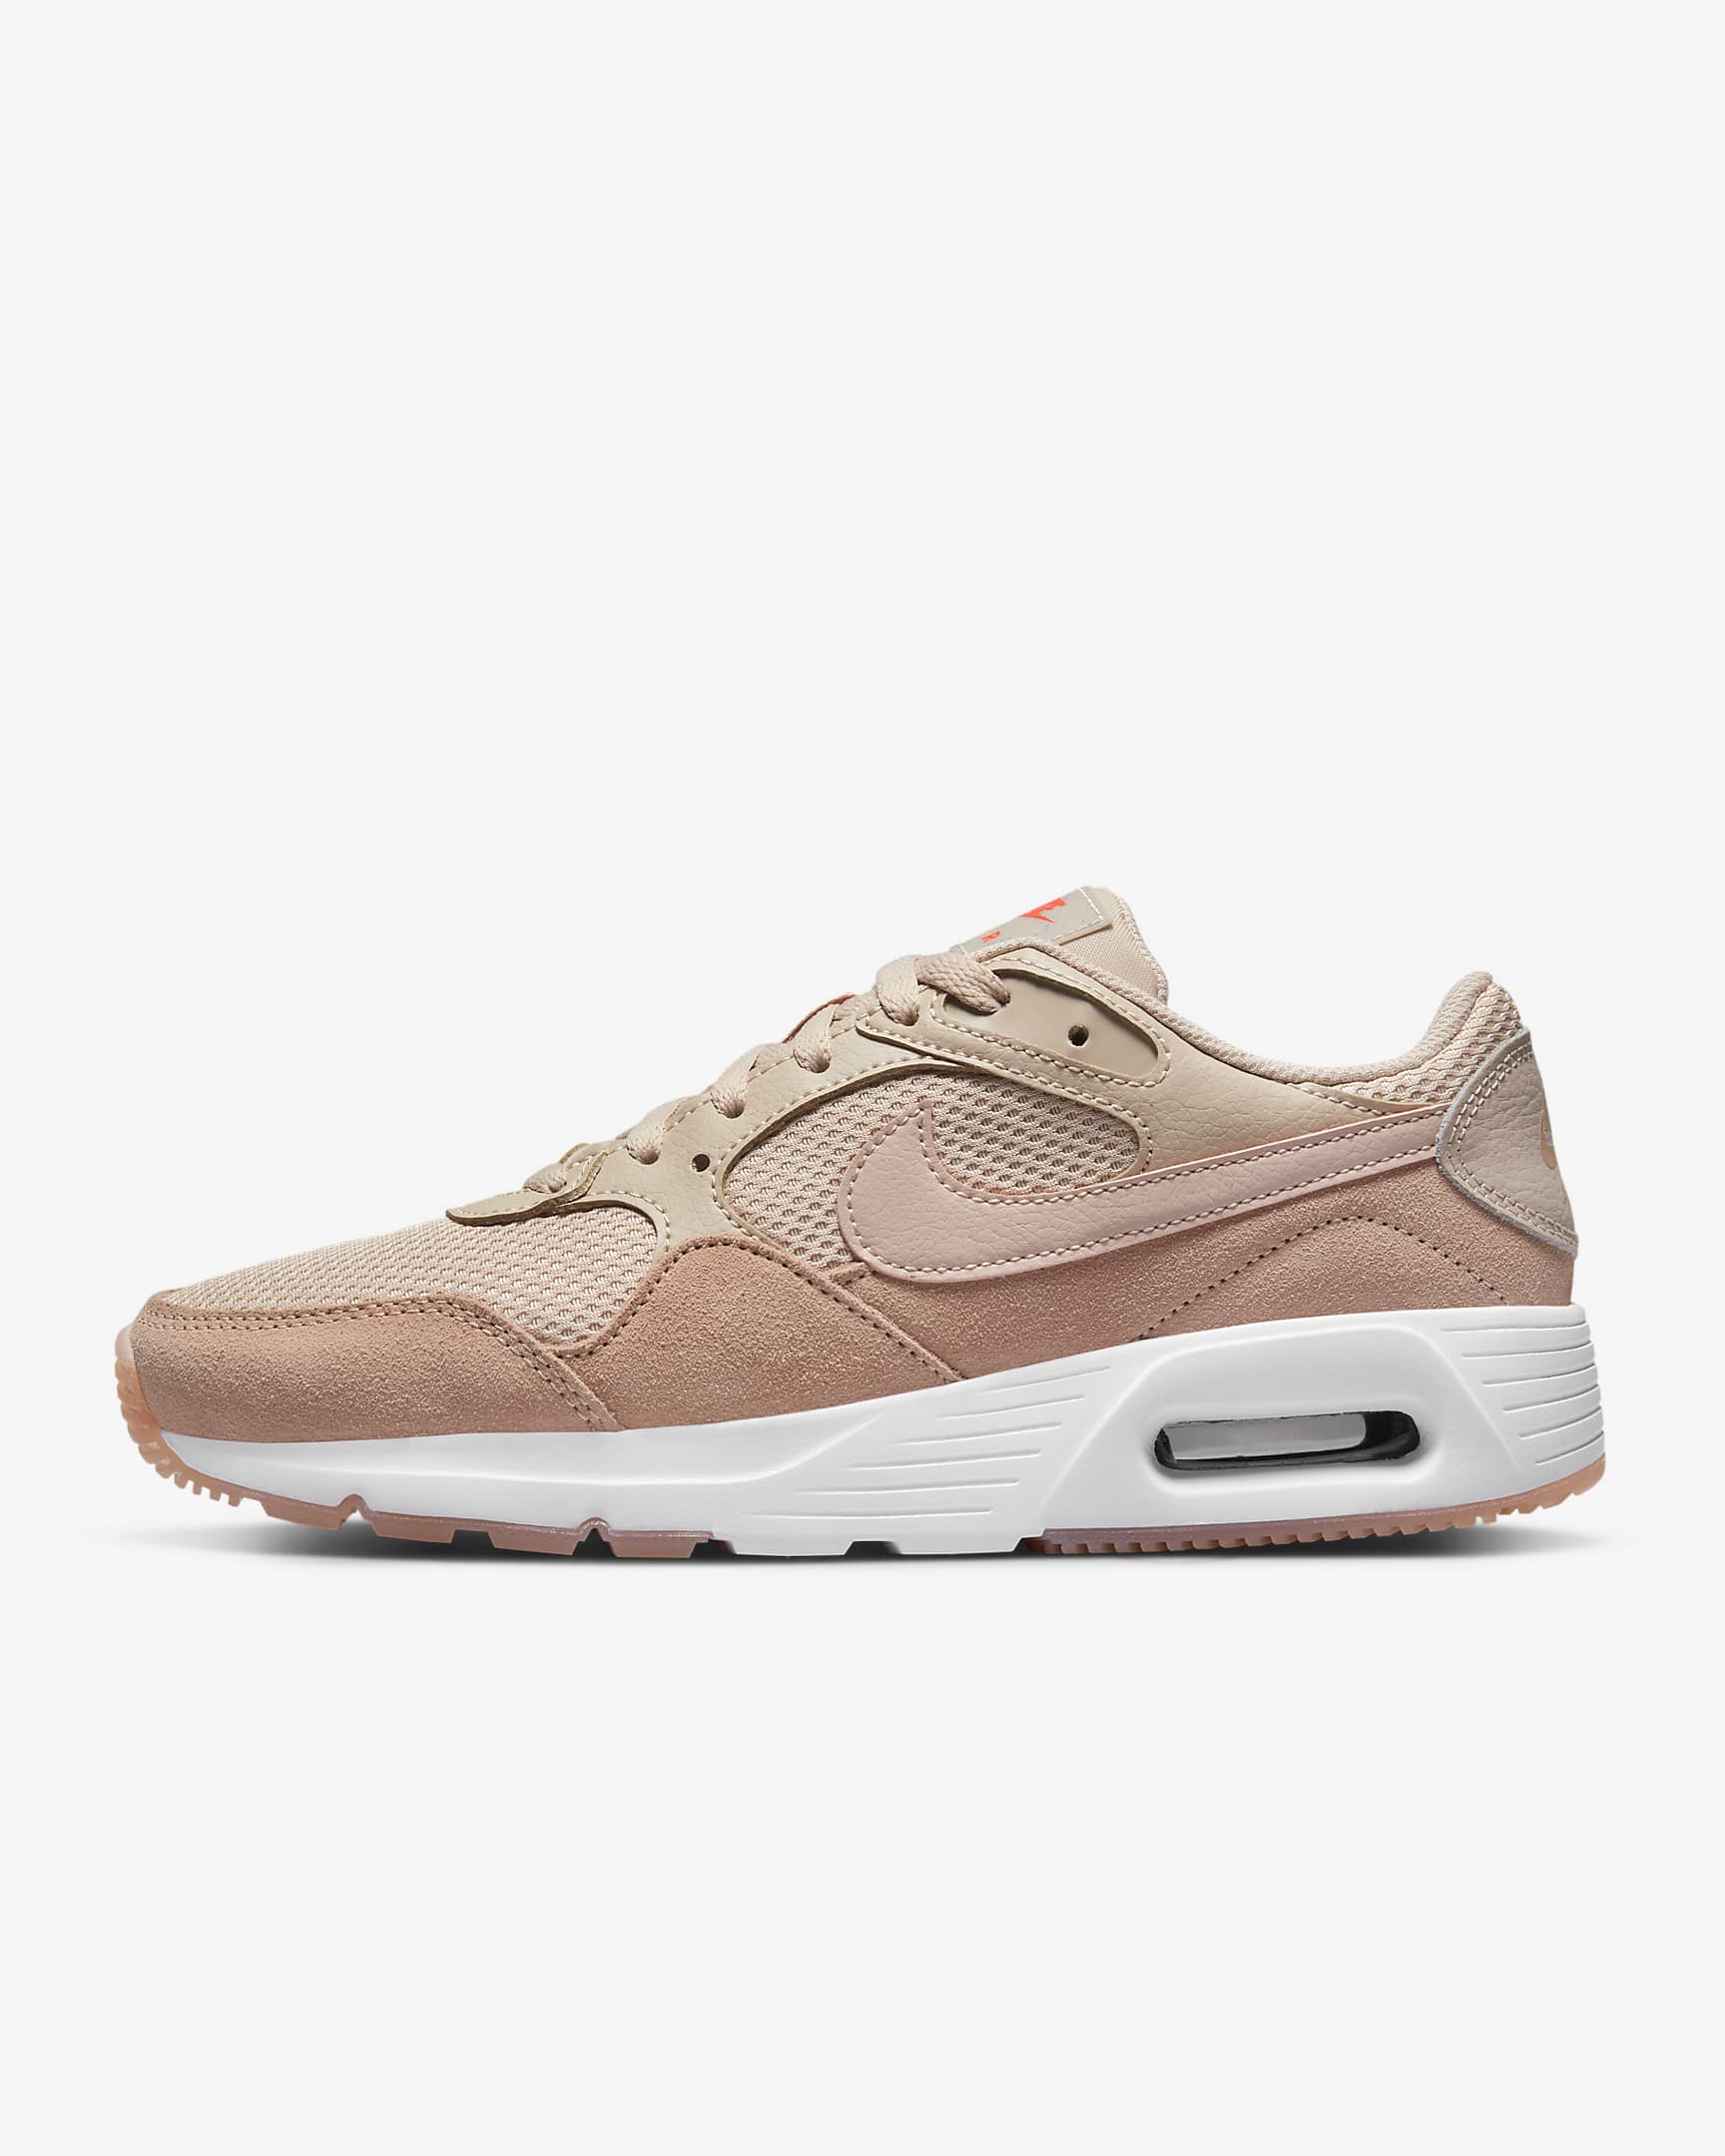 Nike Air Max SC Women's Shoes - Fossil Stone/Rose Whisper/White/Pink Oxford